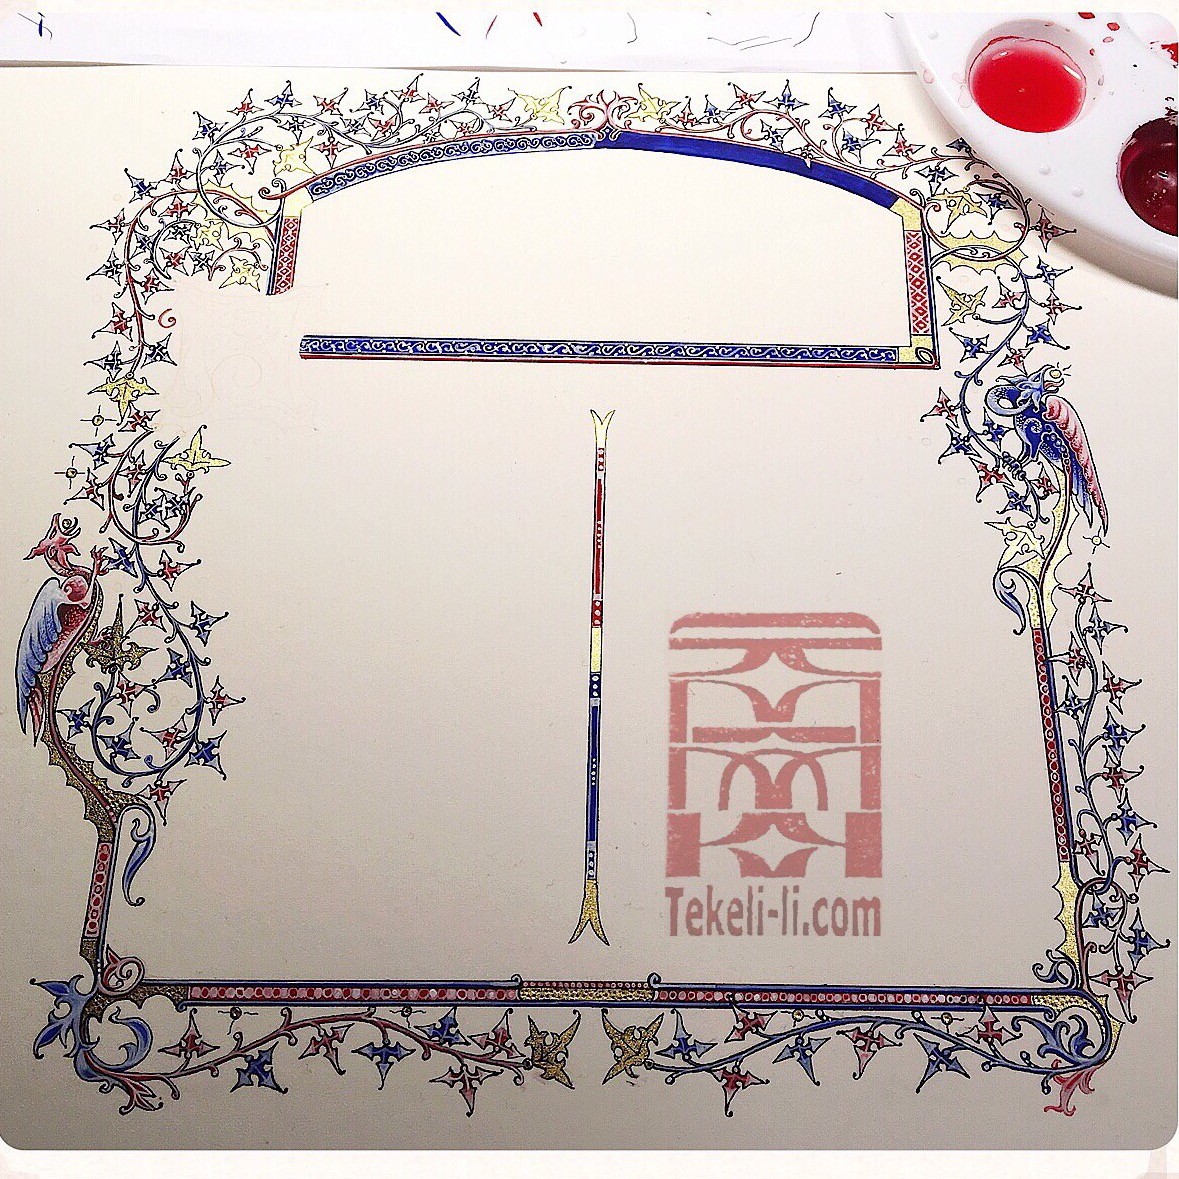 White wash done, I need to finish the frame and the illuminated letter